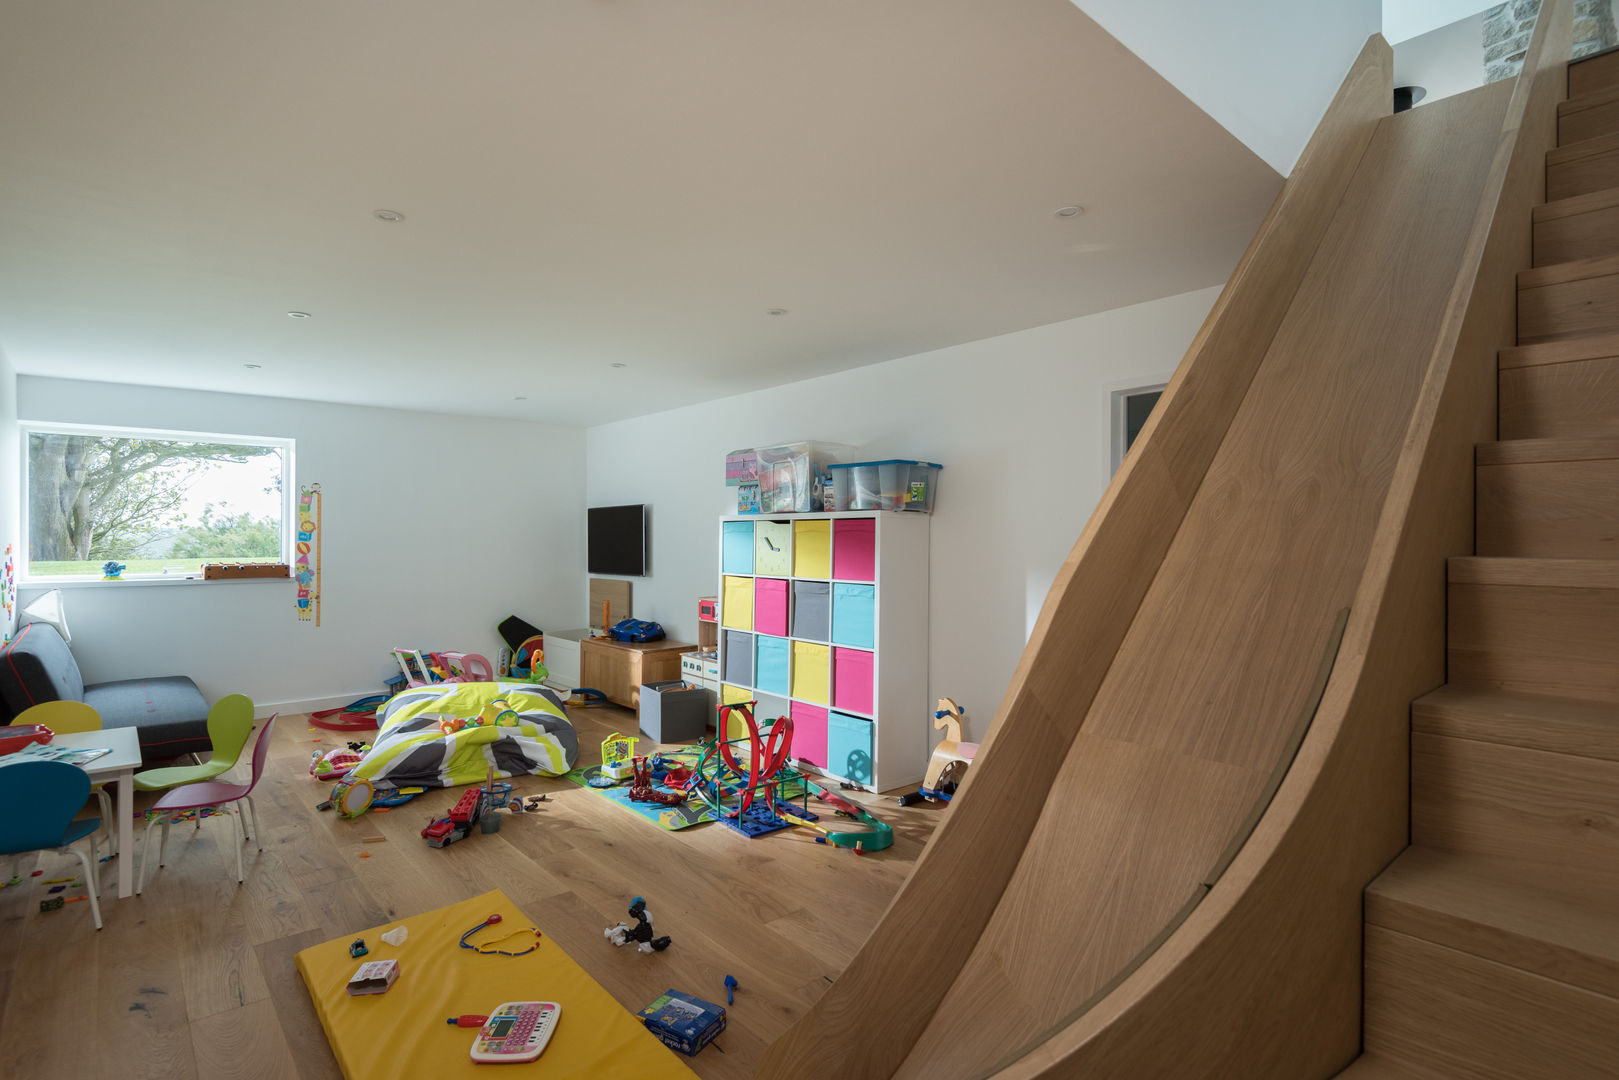 Contemporary Replacement Dwelling, Cubert, Laurence Associates Laurence Associates モダンデザインの 子供部屋 play room,game room,internal slide,fun,games,storage,children,toys,modular storage,bright colours,play,kids room